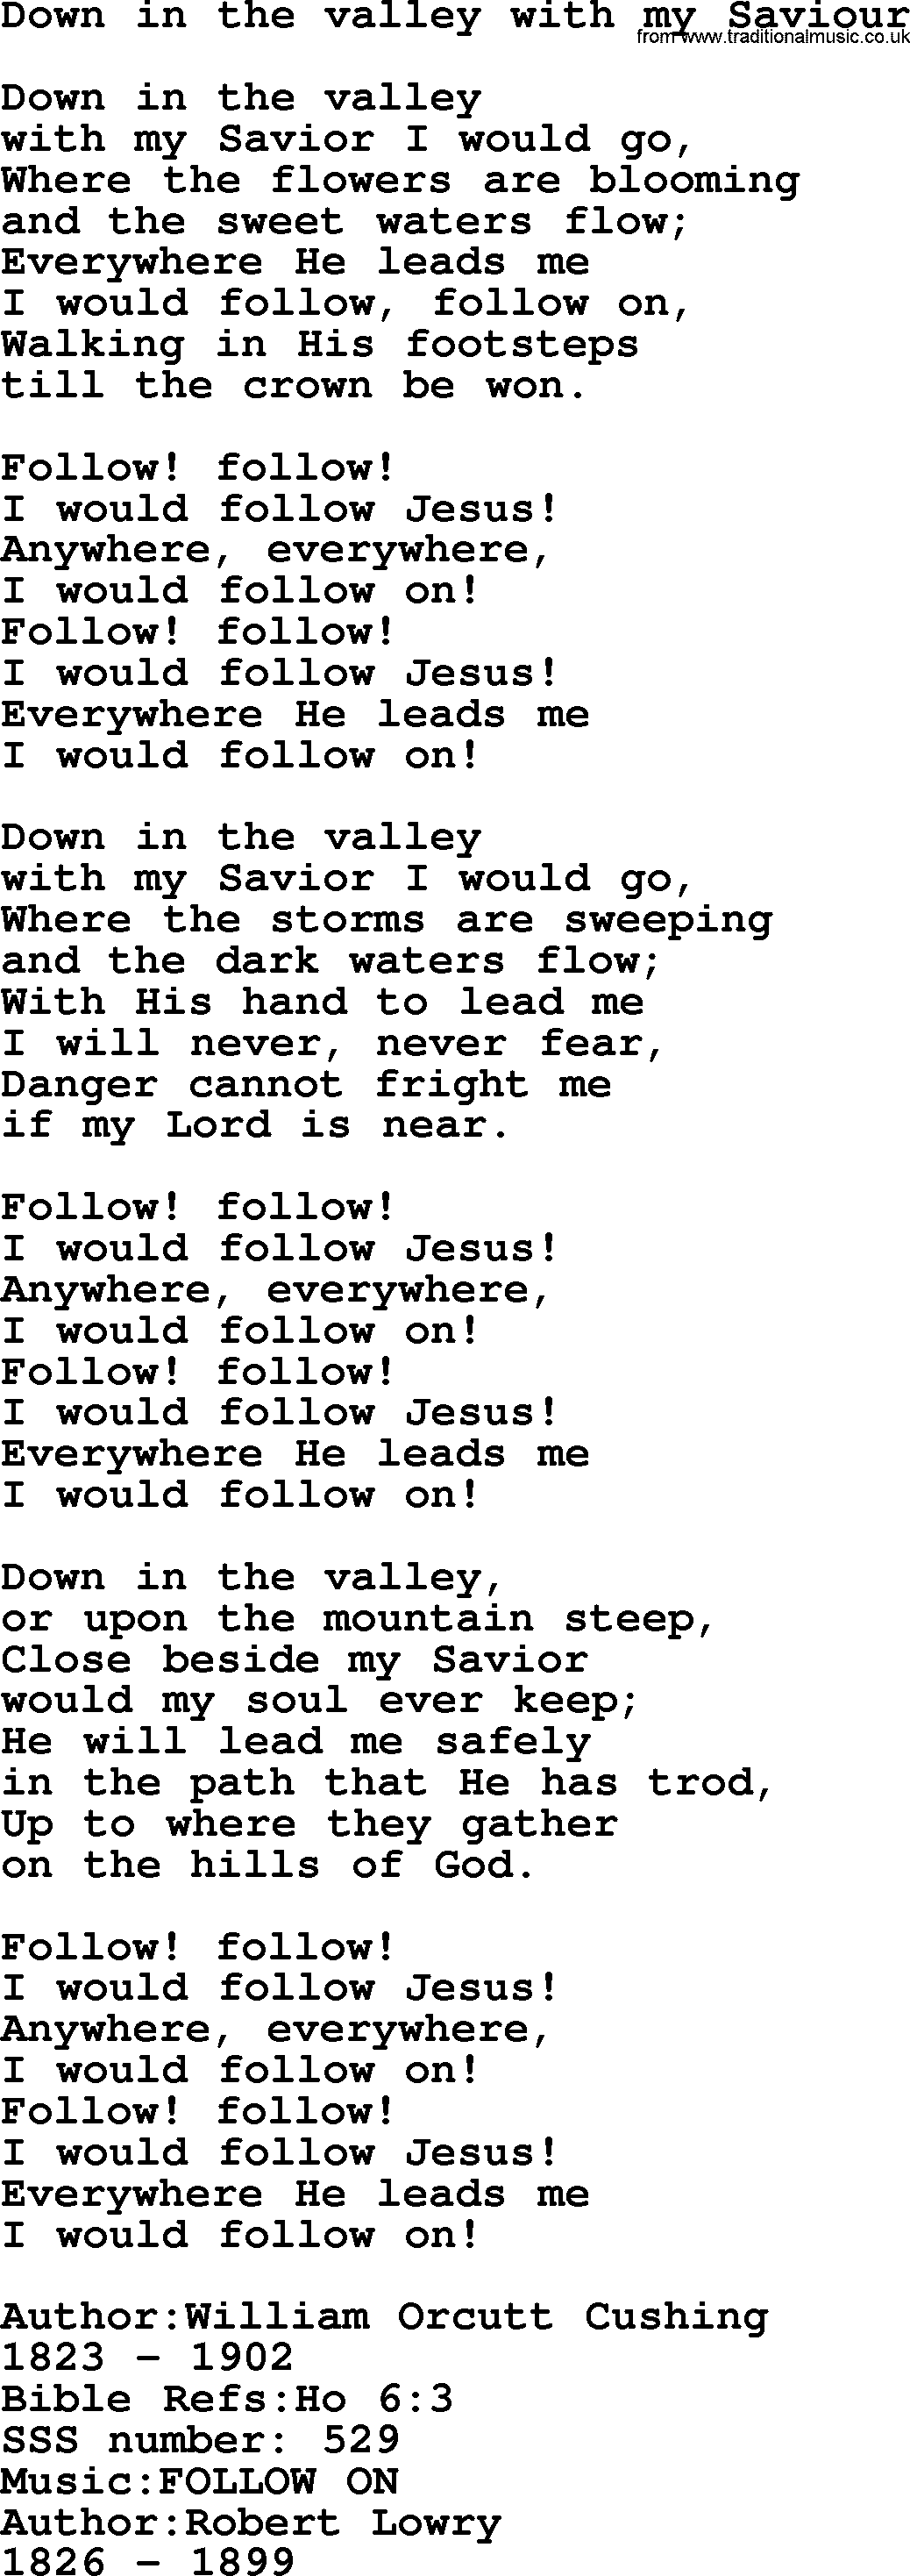 Sacred Songs and Solos complete, 1200 Hymns, title: Down In The Valley With My Saviour, lyrics and PDF